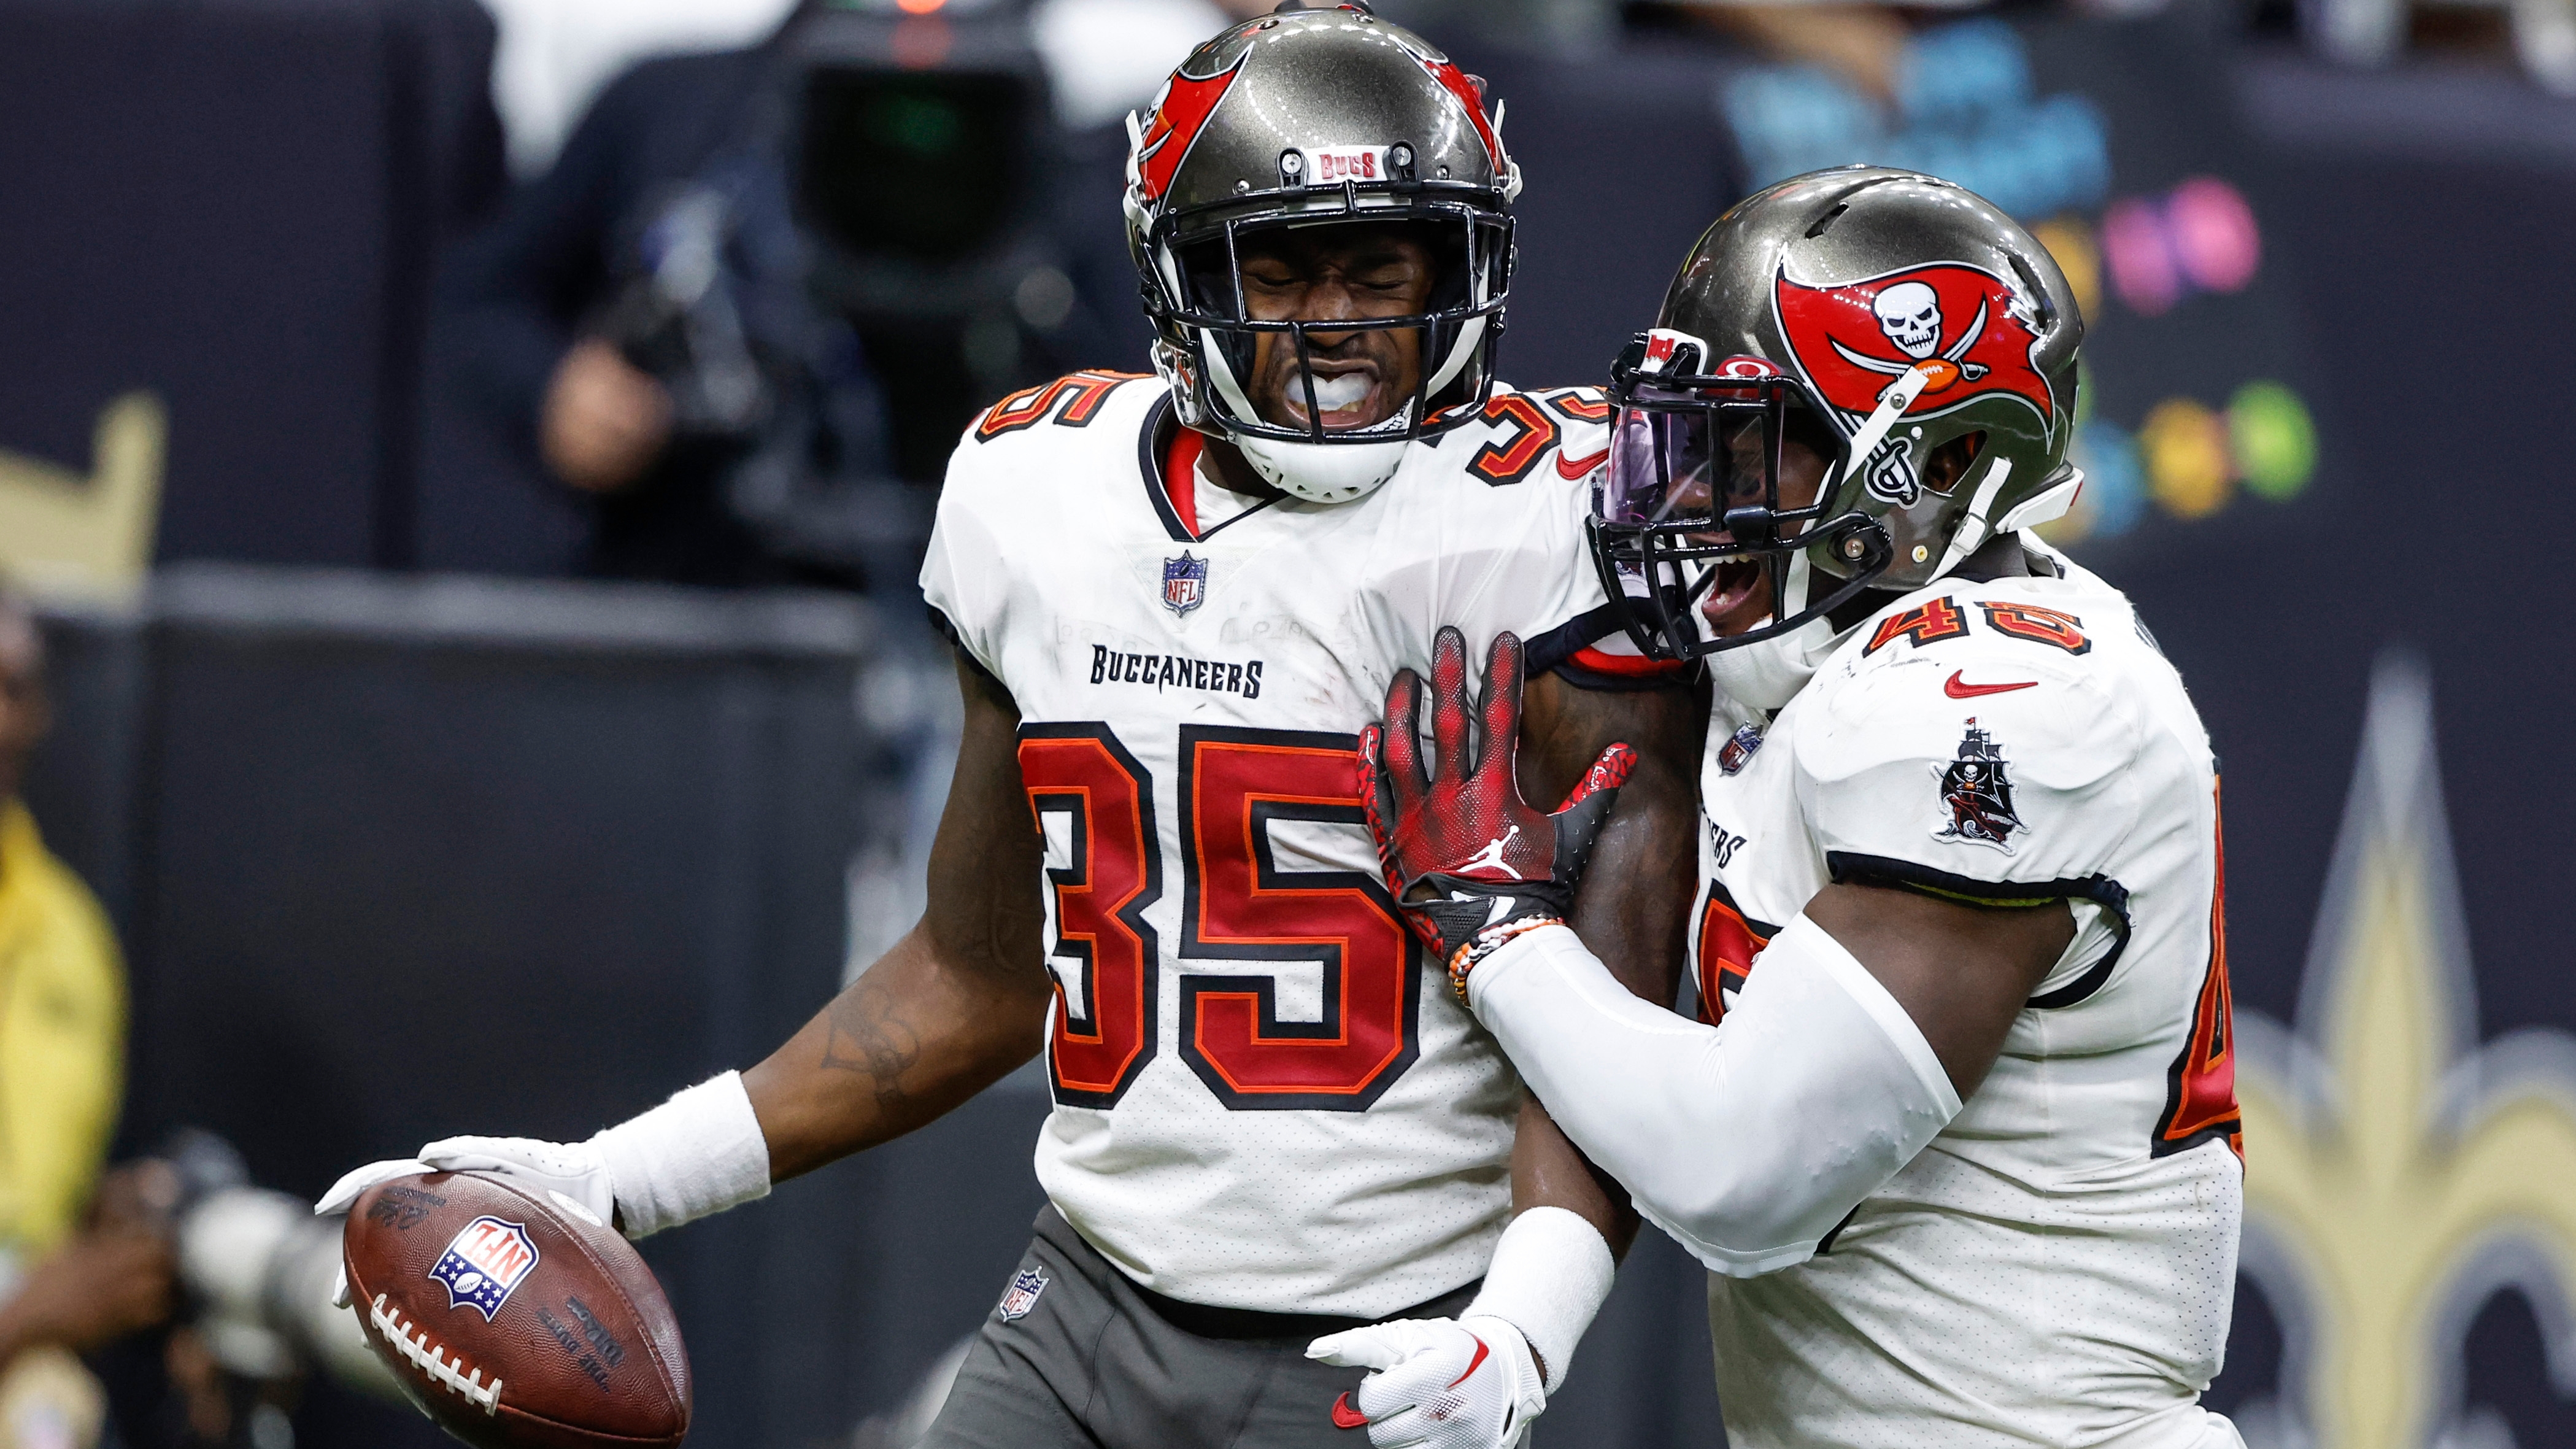 Bowles: Bucs simply need to play better to end scoring woes